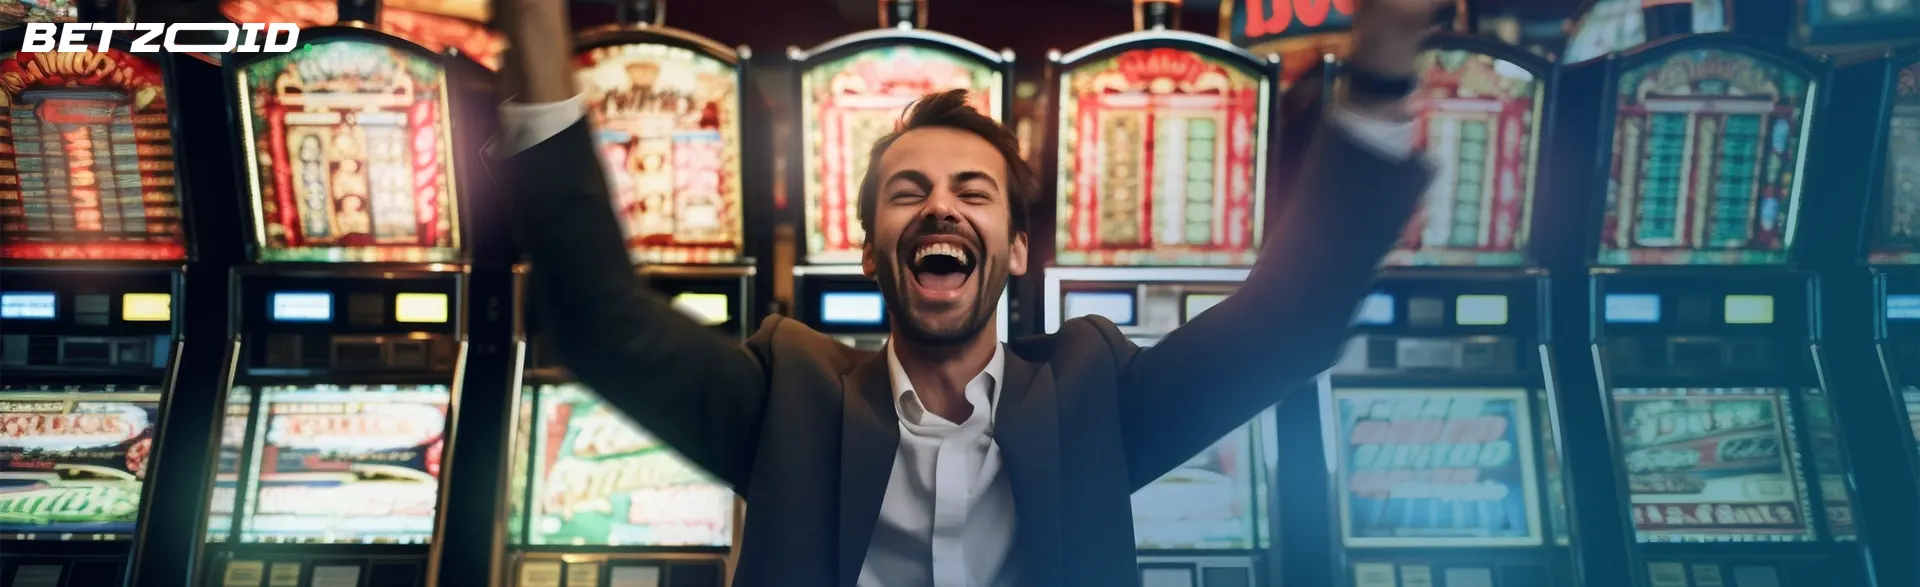 Real money casinos player who has just blown a score.